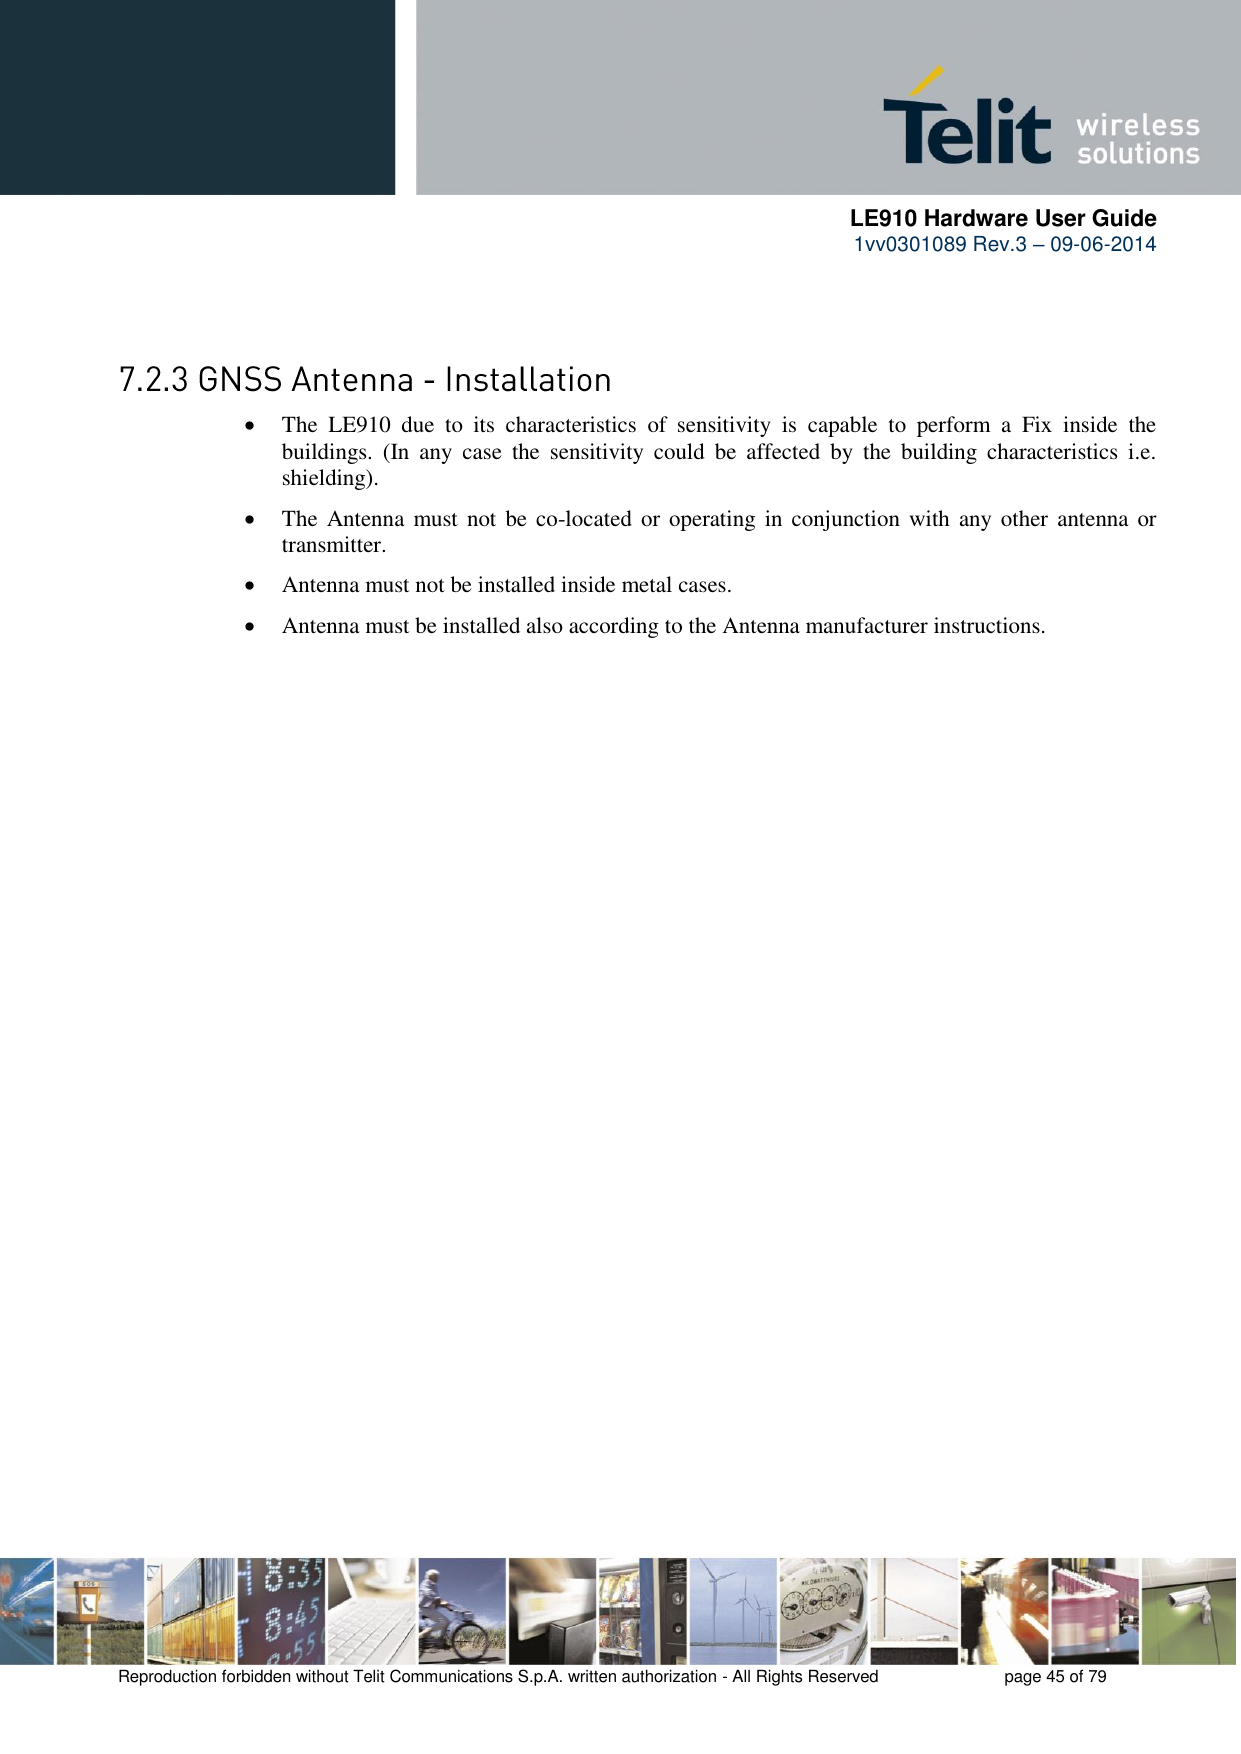      LE910 Hardware User Guide 1vv0301089 Rev.3 – 09-06-2014    Reproduction forbidden without Telit Communications S.p.A. written authorization - All Rights Reserved    page 45 of 79     The  LE910  due  to  its  characteristics  of  sensitivity  is  capable  to  perform  a  Fix  inside  the buildings.  (In  any  case  the  sensitivity  could  be  affected  by  the  building  characteristics  i.e. shielding).  The Antenna must  not be co-located  or operating in conjunction with  any other  antenna or transmitter.  Antenna must not be installed inside metal cases.  Antenna must be installed also according to the Antenna manufacturer instructions. 